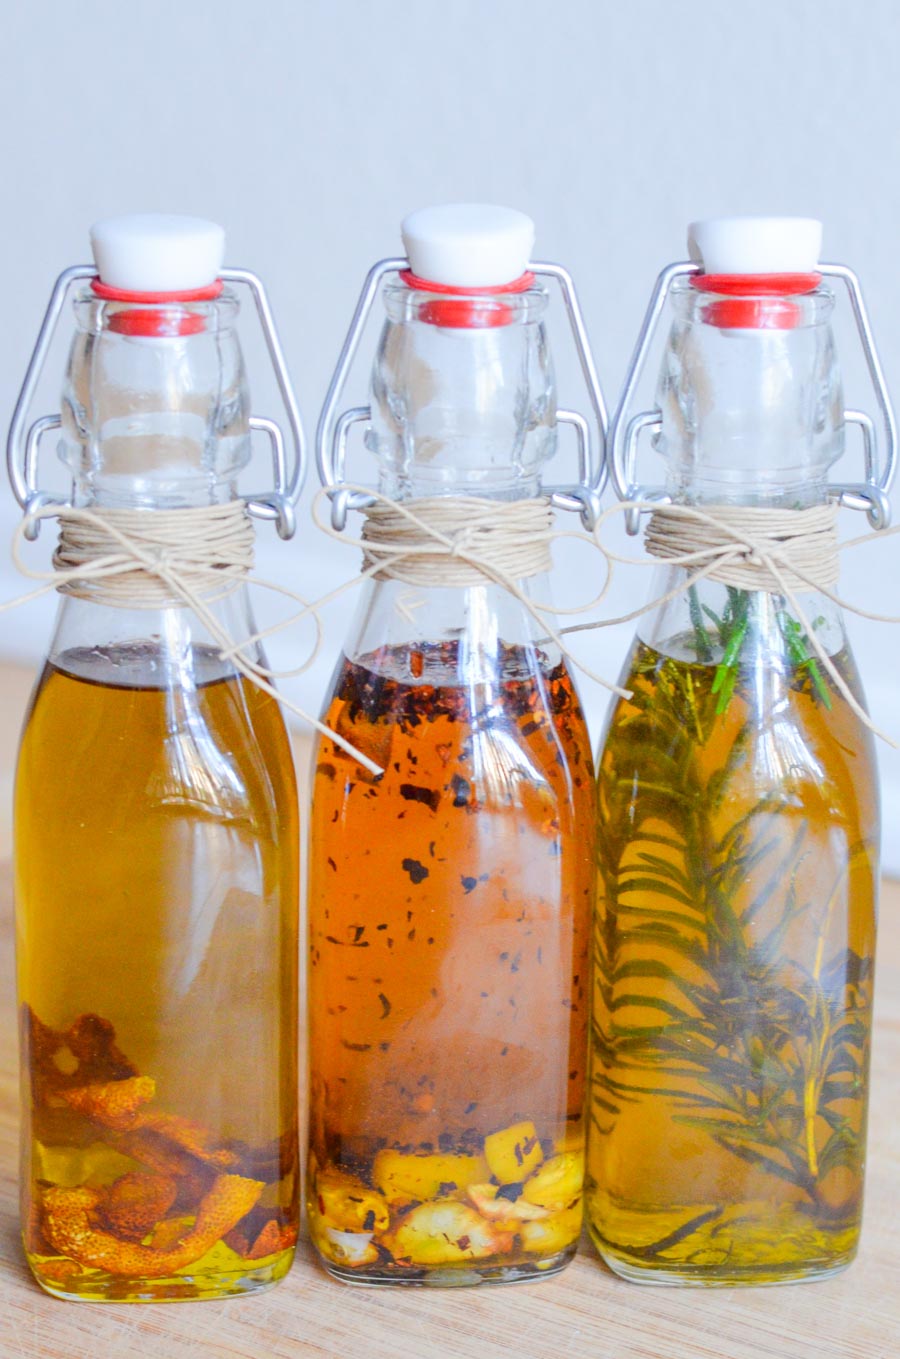 Homemade Gift Idea - Infused Olive Oils